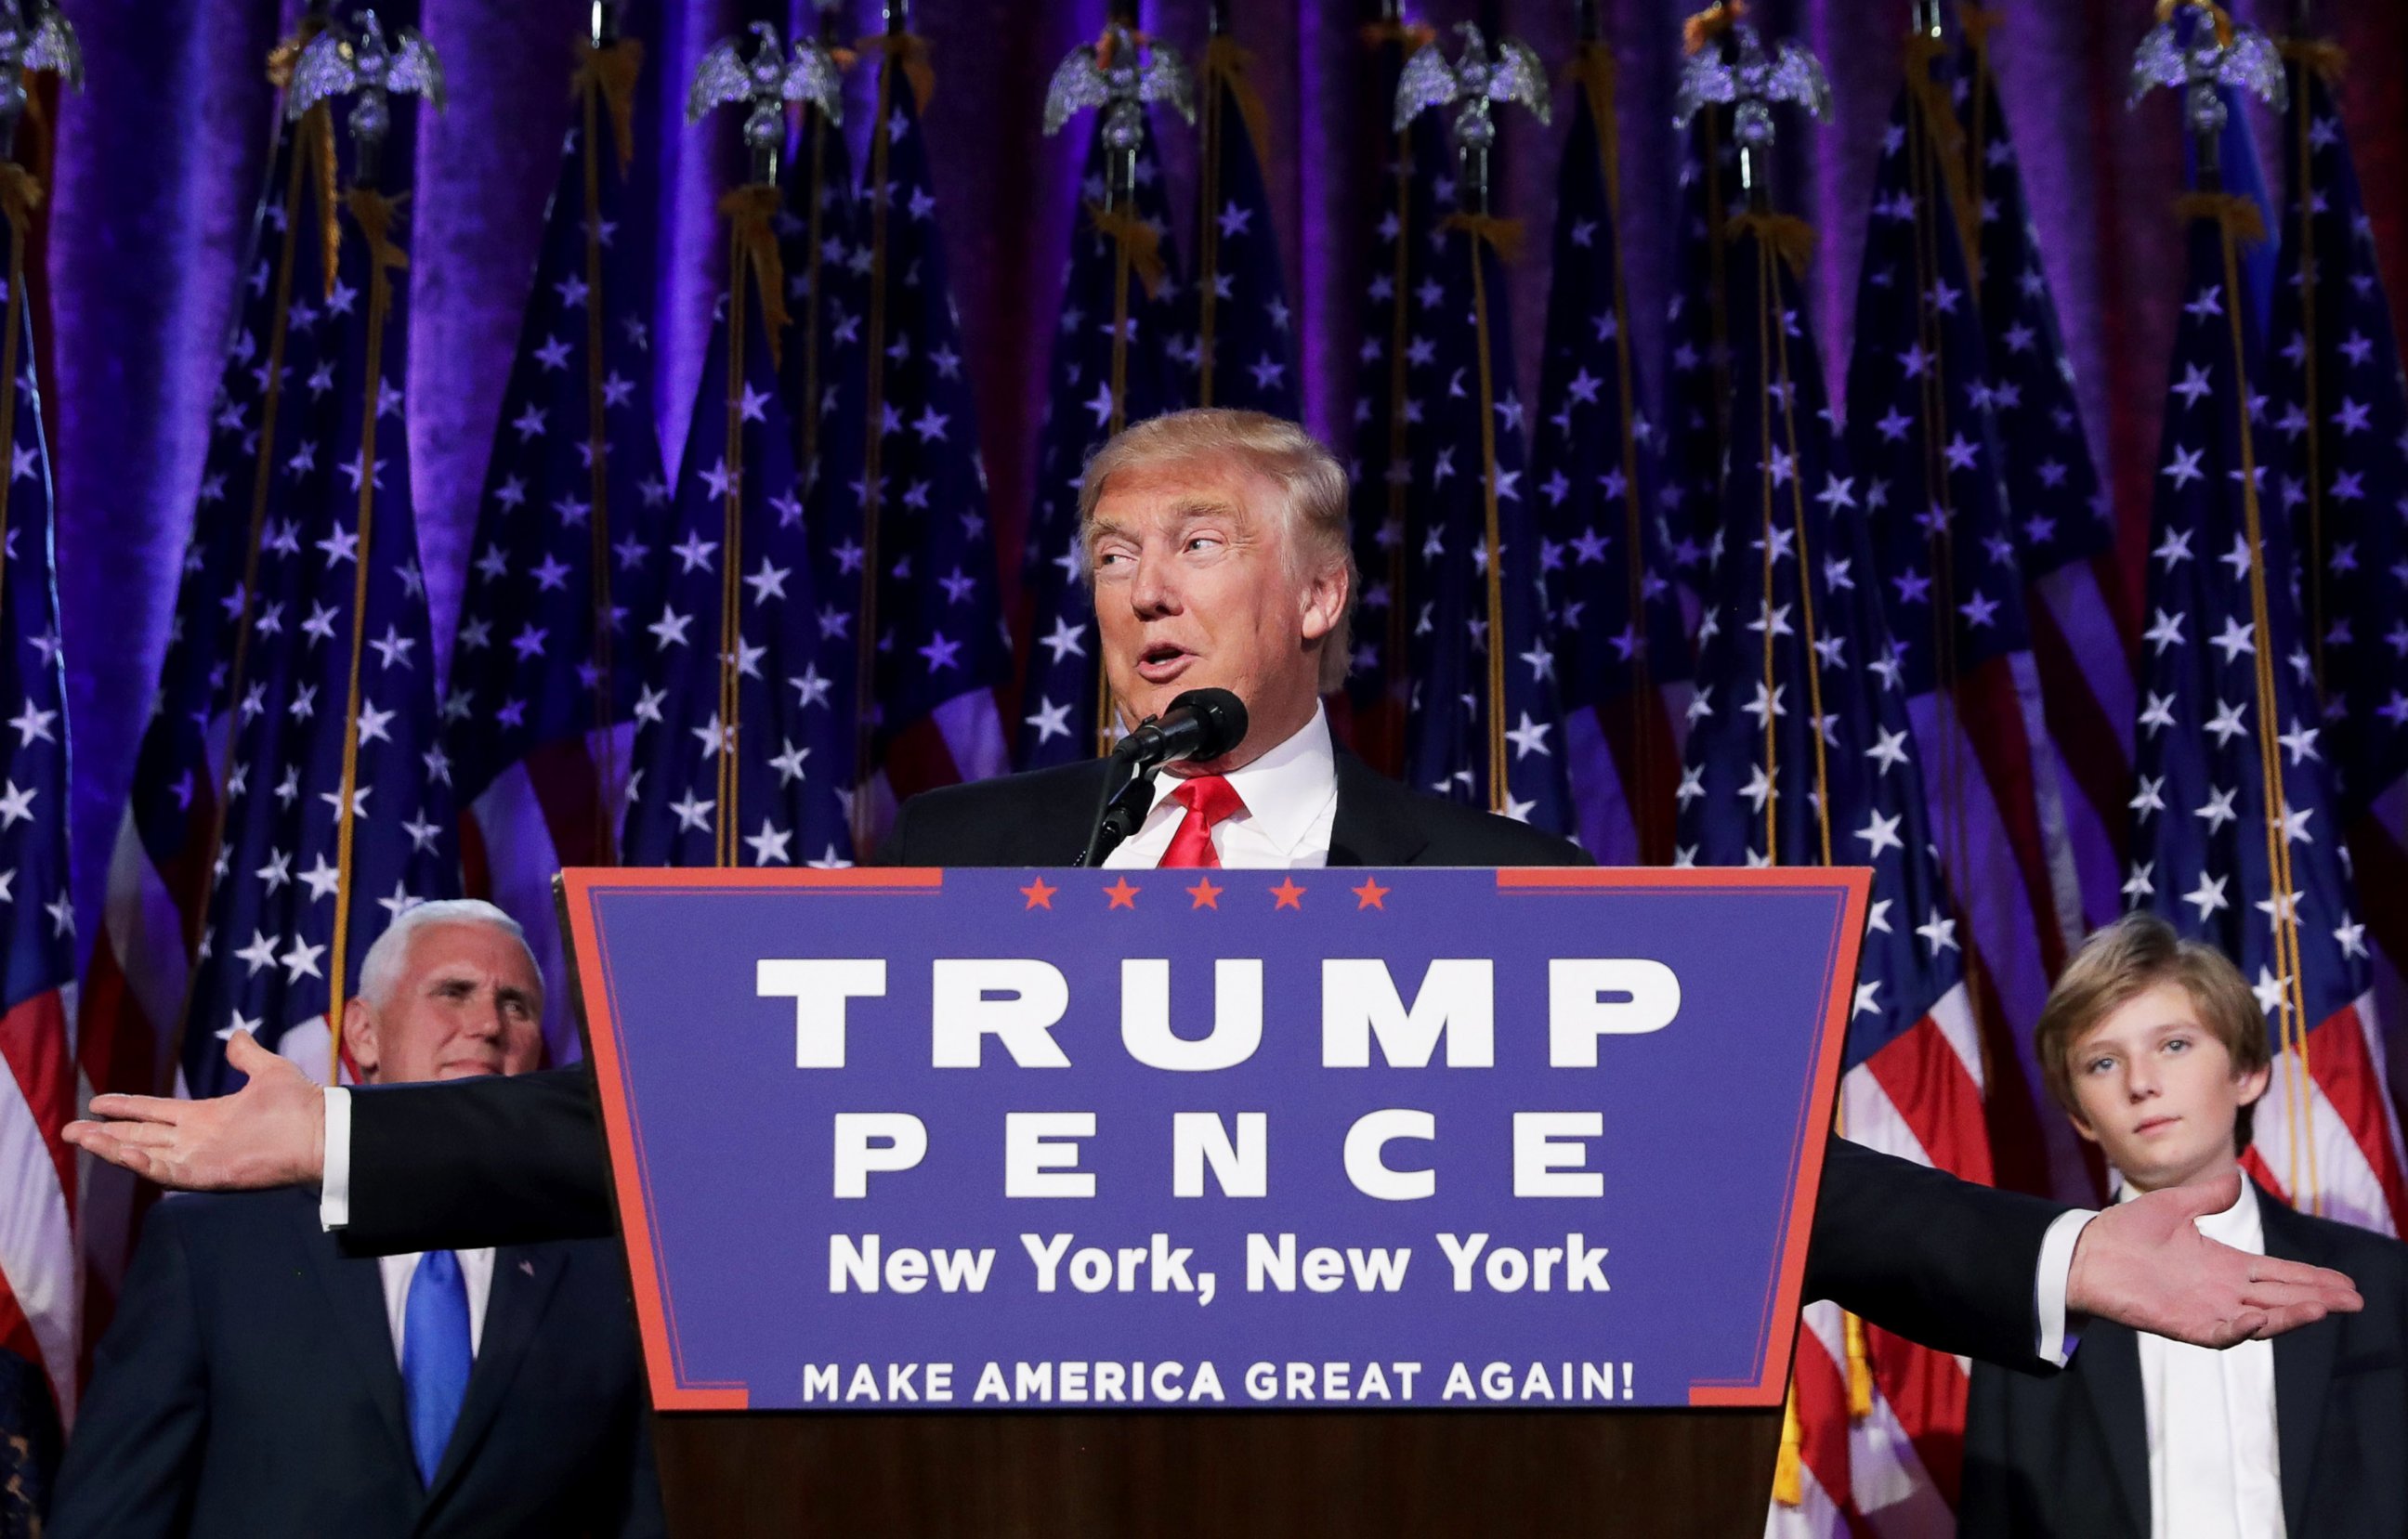 PHOTO: President-elect Donald Trump delivers his acceptance speech during his election night event at the New York Hilton Midtown in the early morning hours of Nov. 9, 2016 in New York City. 